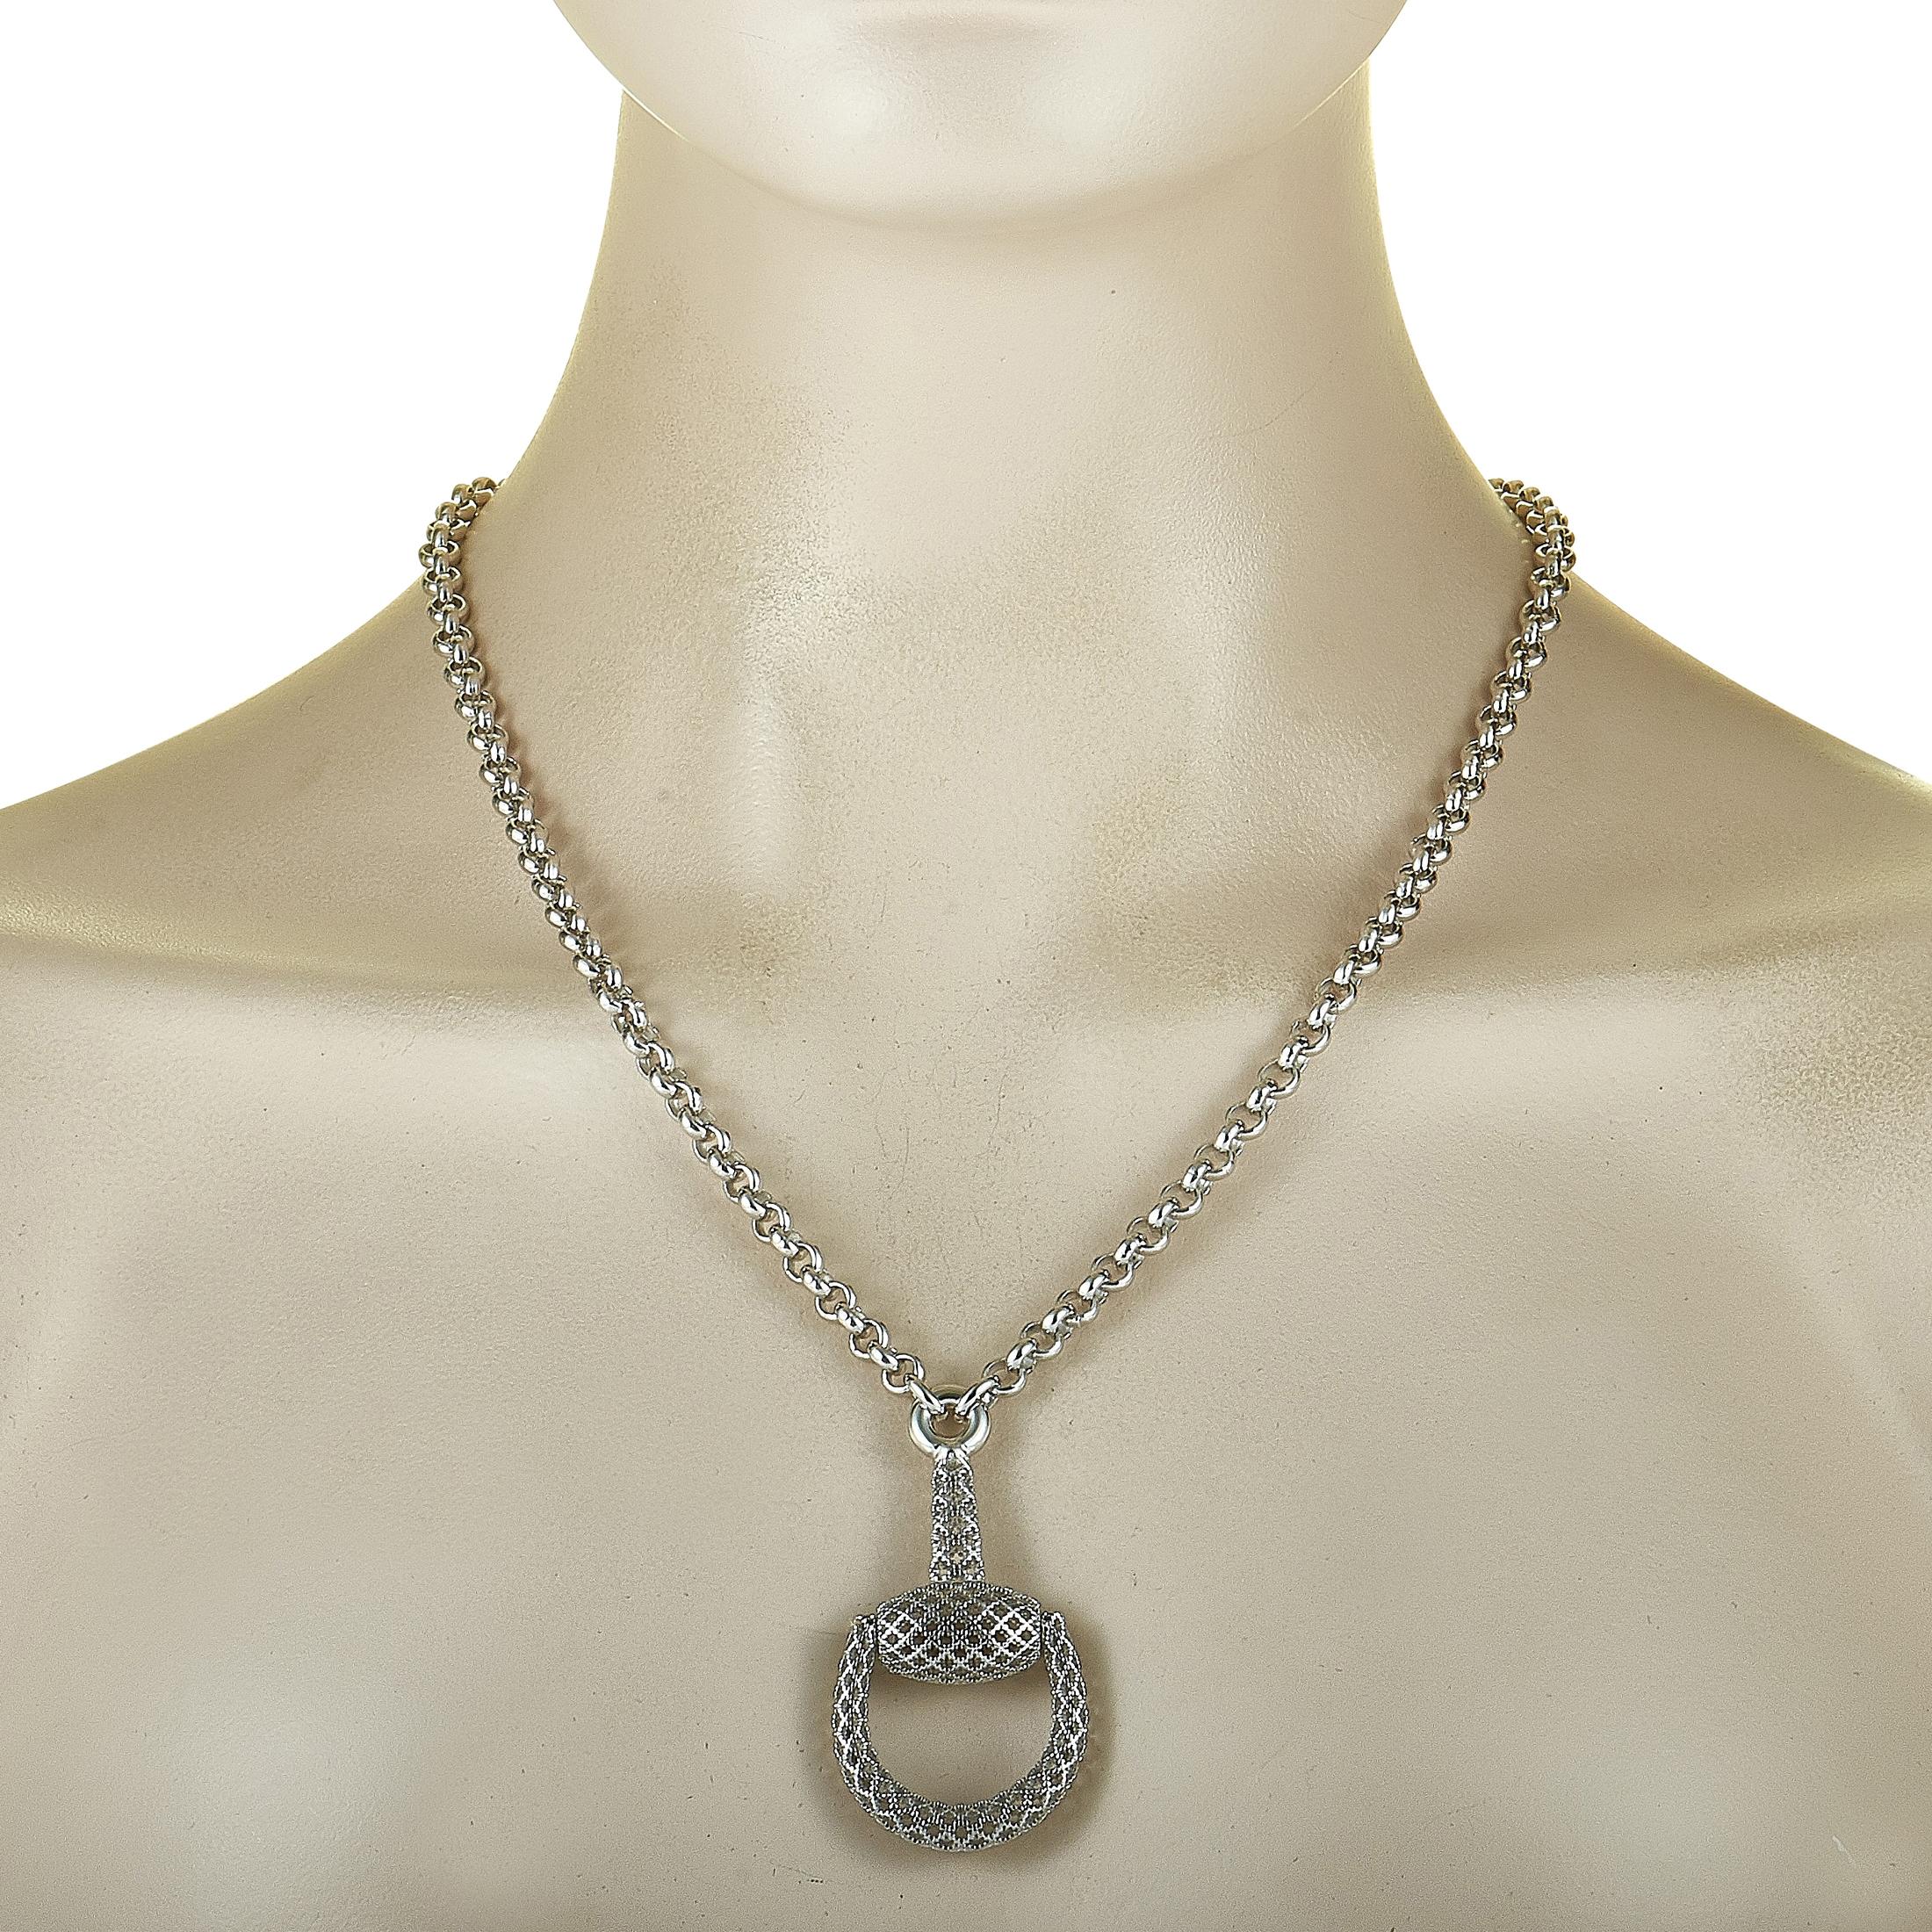 The Gucci “Horsebit” necklace is crafted from silver and weighs 53 grams. The necklace is presented with a 24” chain and a pendant that measures 2.25” in length and 1.20” in width.
 
 This jewelry piece is offered in brand new condition and includes